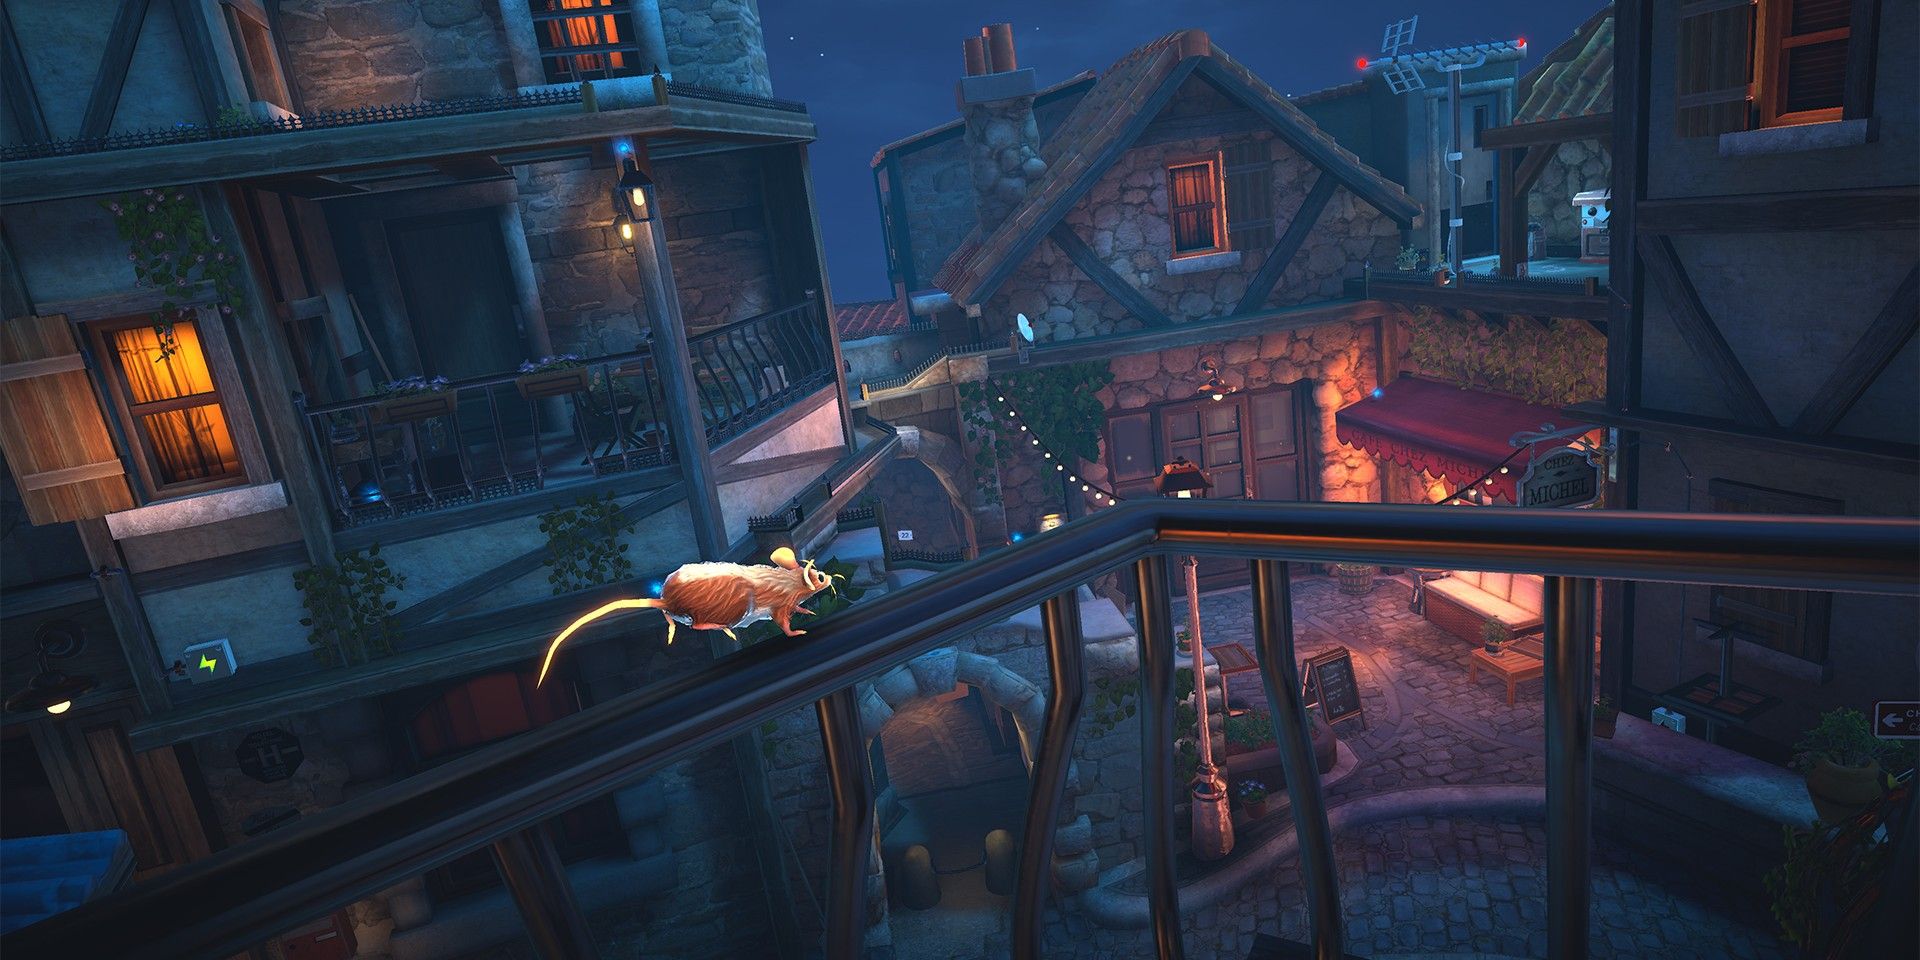 A promotional still from the upcoming game The Spirit and the Mouse